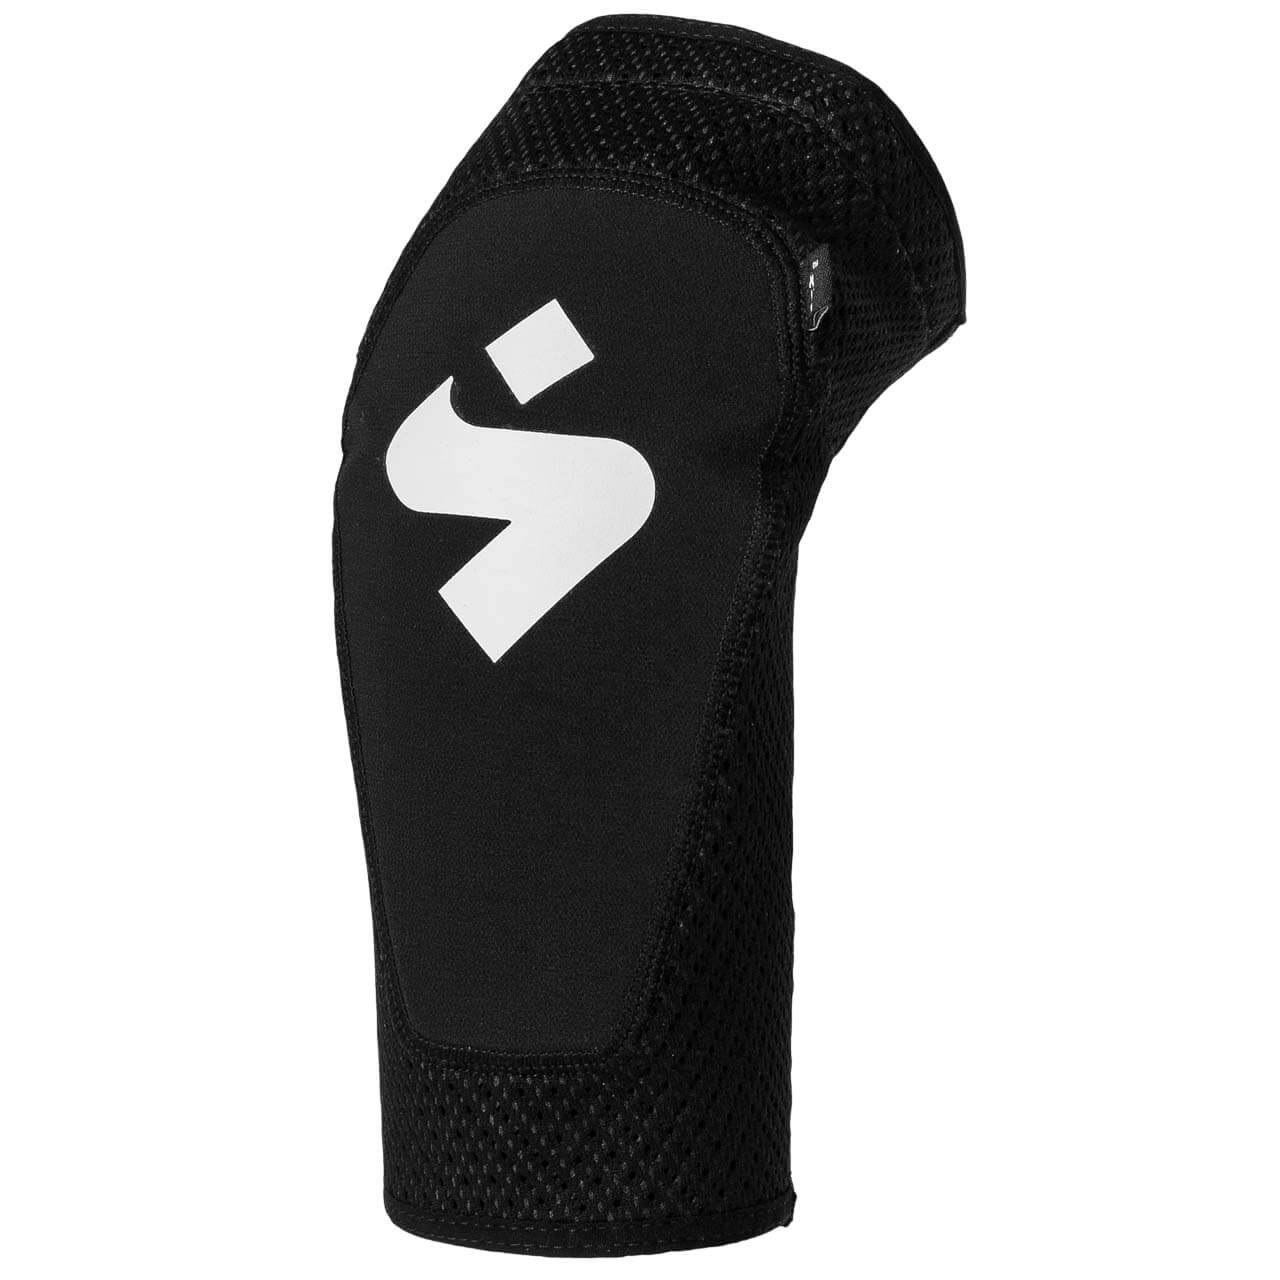 Sweet Protection Elbow Guards Light - Black, XS